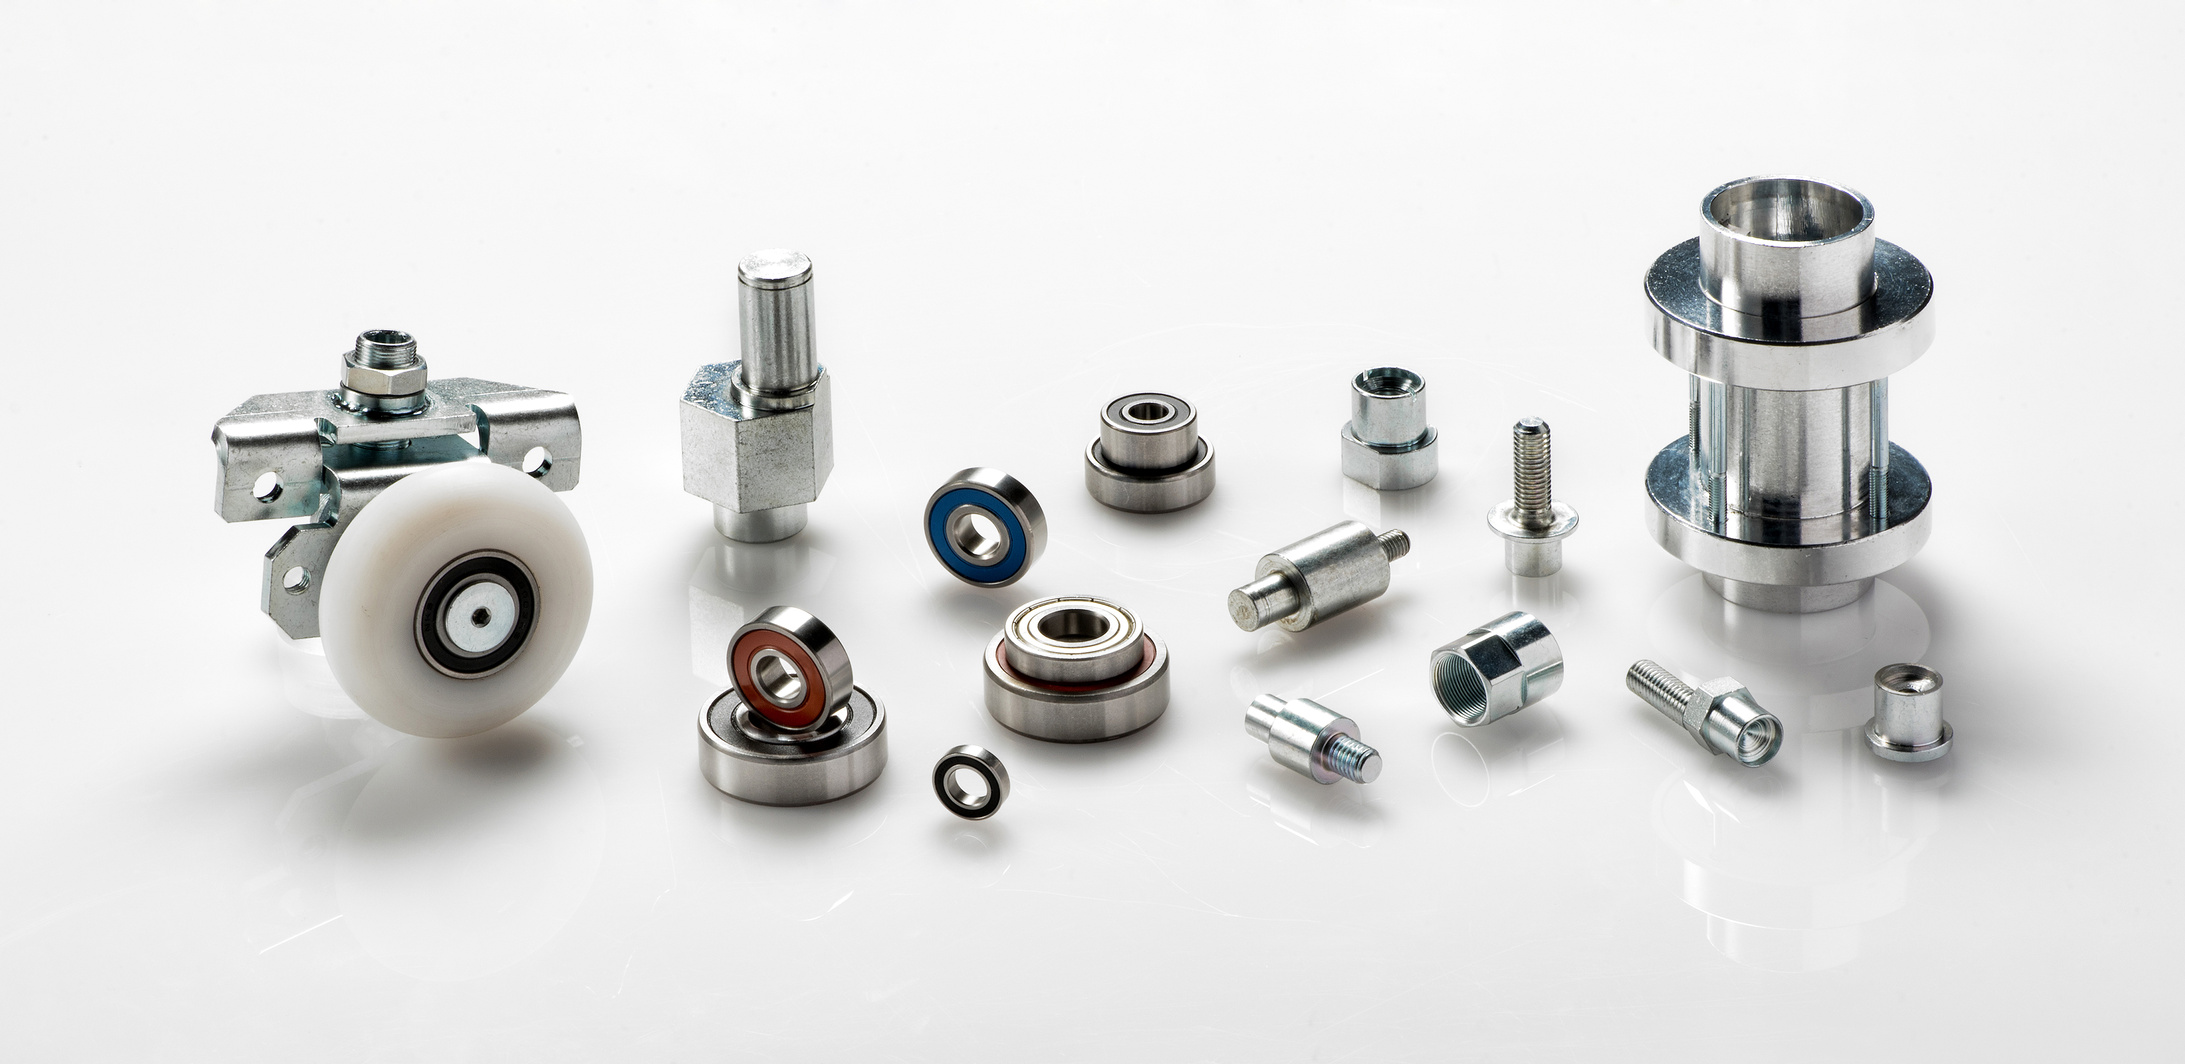 Selection of Precision Steel Machine Components on White